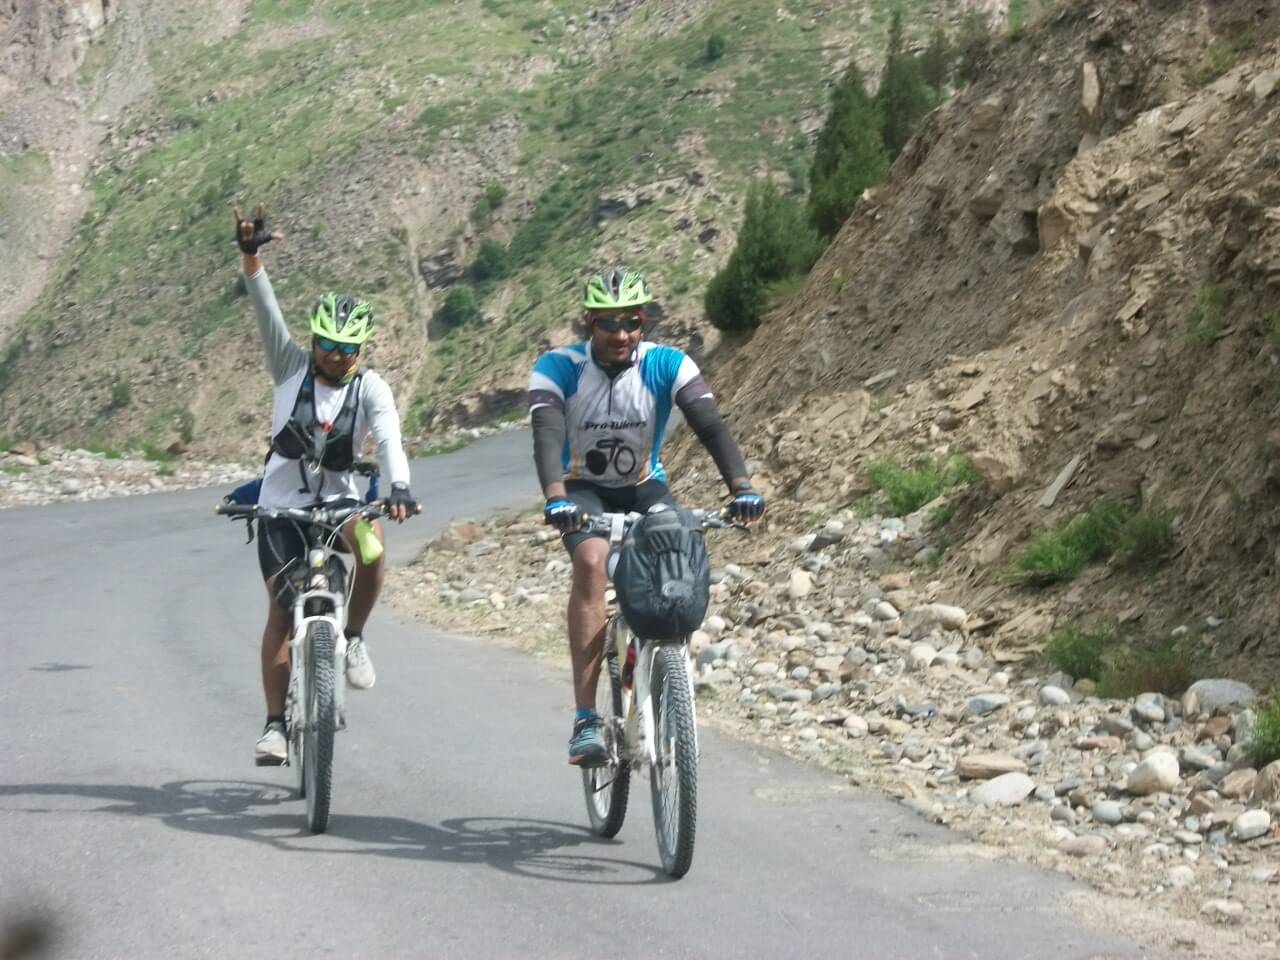 You are currently viewing Information related cycling adventure from Manali to Leh